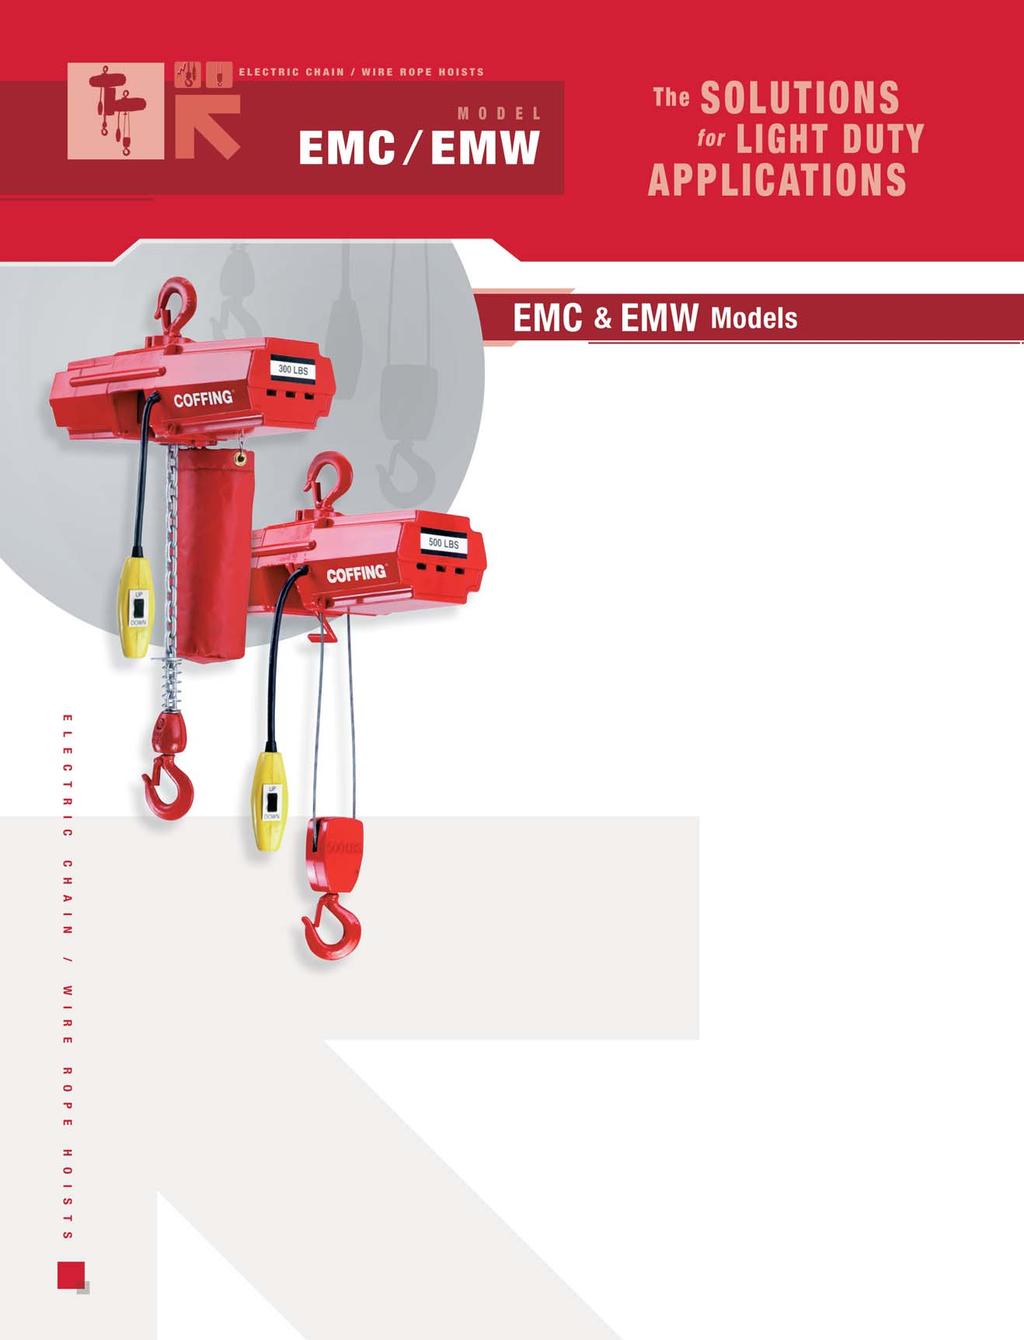 COFFING EMC & EMW Models - Compact chain and wire rope hoists designed for a variety of light duty applications. These models feature thermally protected motors.